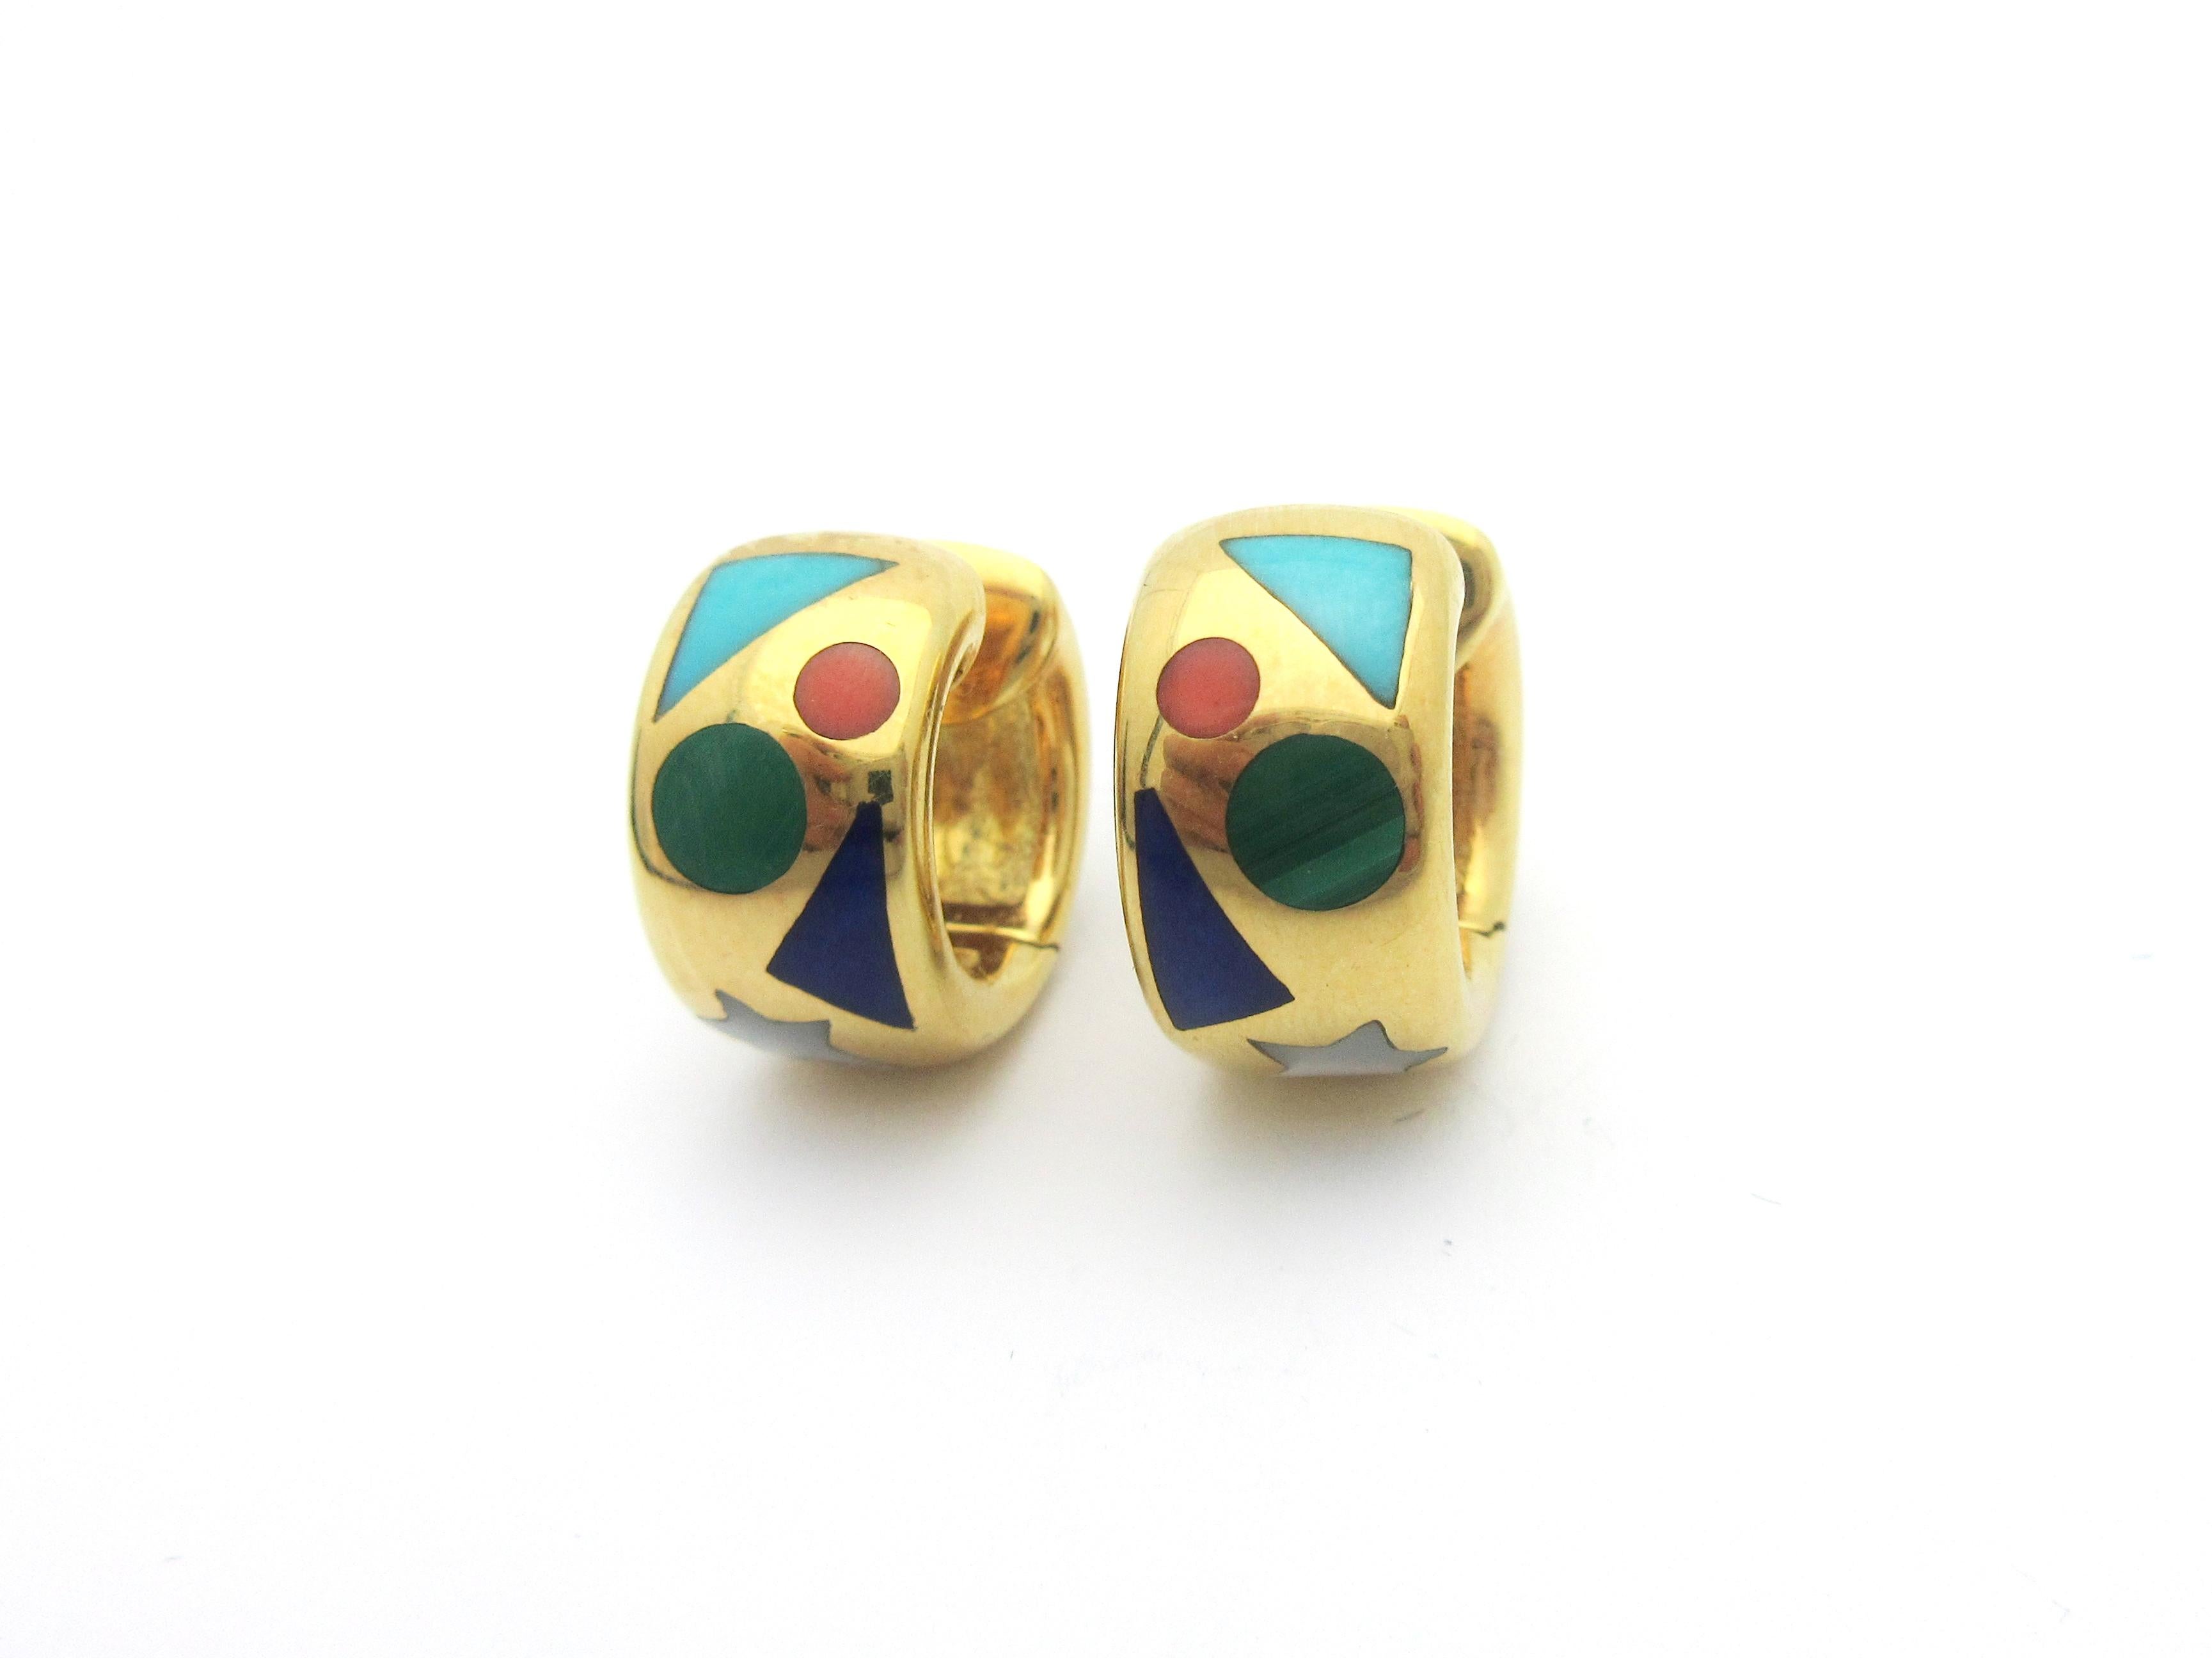 This beautiful pair of huggie hoop earrings by Asch Grossbardt were made from 18k yellow gold and feature geometric gemstone inlay.  The stones are turquoise, malachite, lapis lazuli, coral, and mother of pearl.  The earrings measure approximately